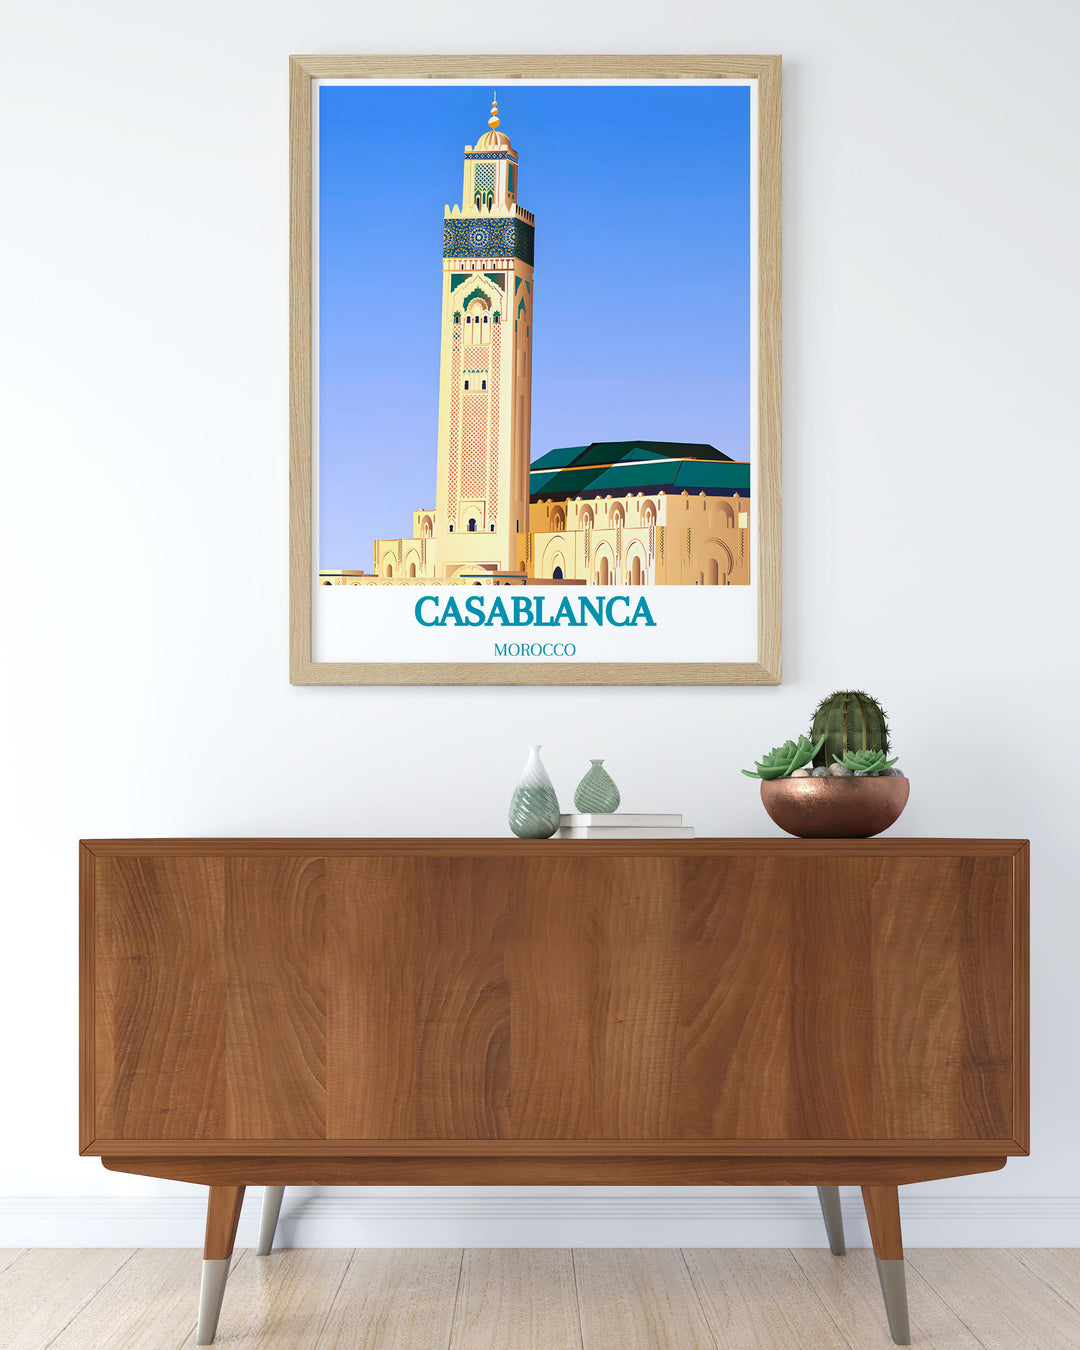 Artistic depiction of a tranquil morning by the Casablanca seashore, perfect for bringing serene coastal vibes into your home.